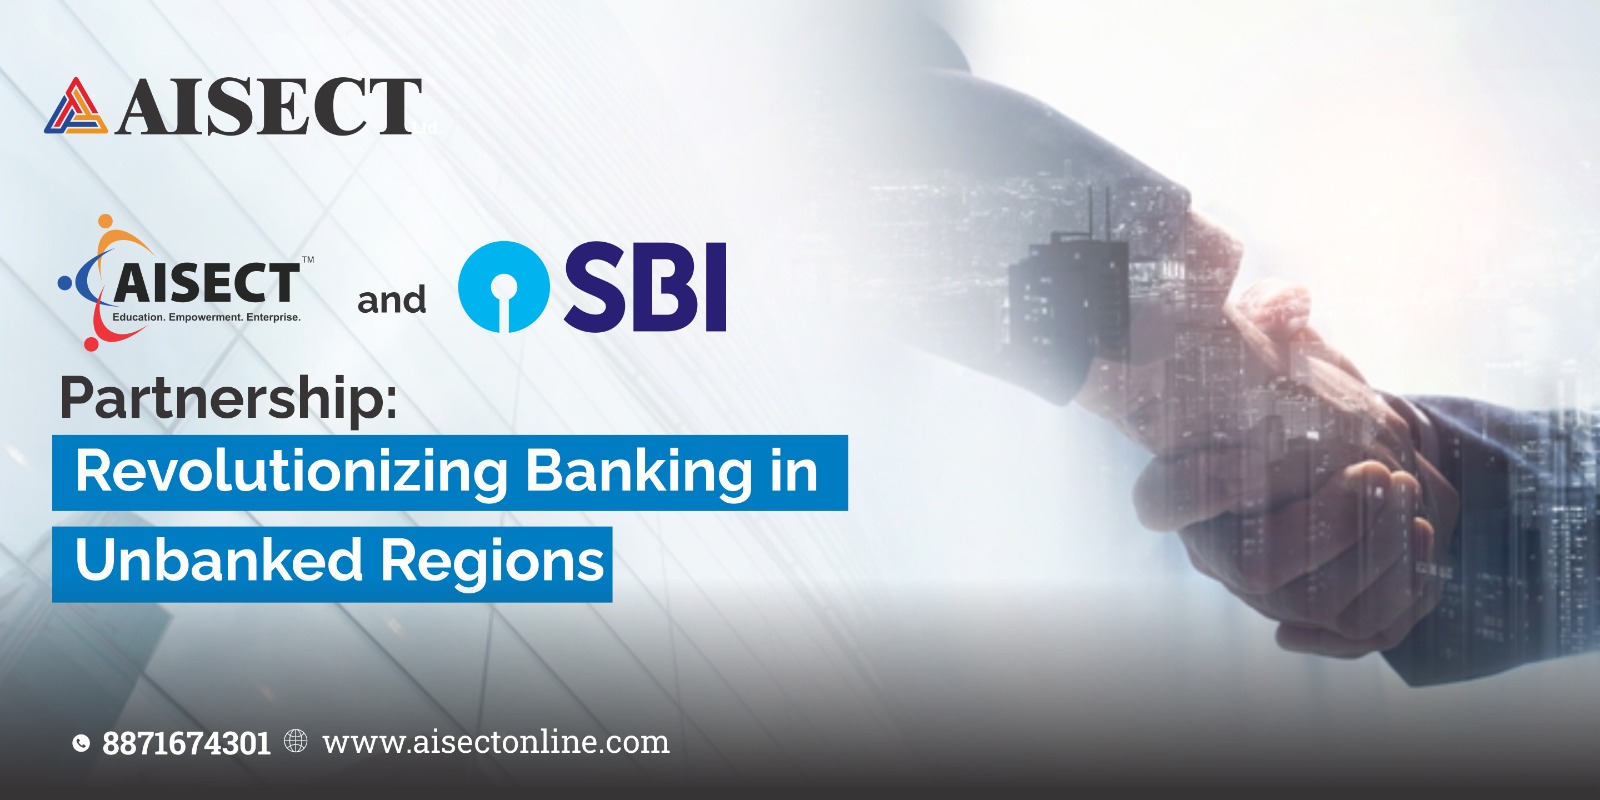 AISECT and SBI Partnership